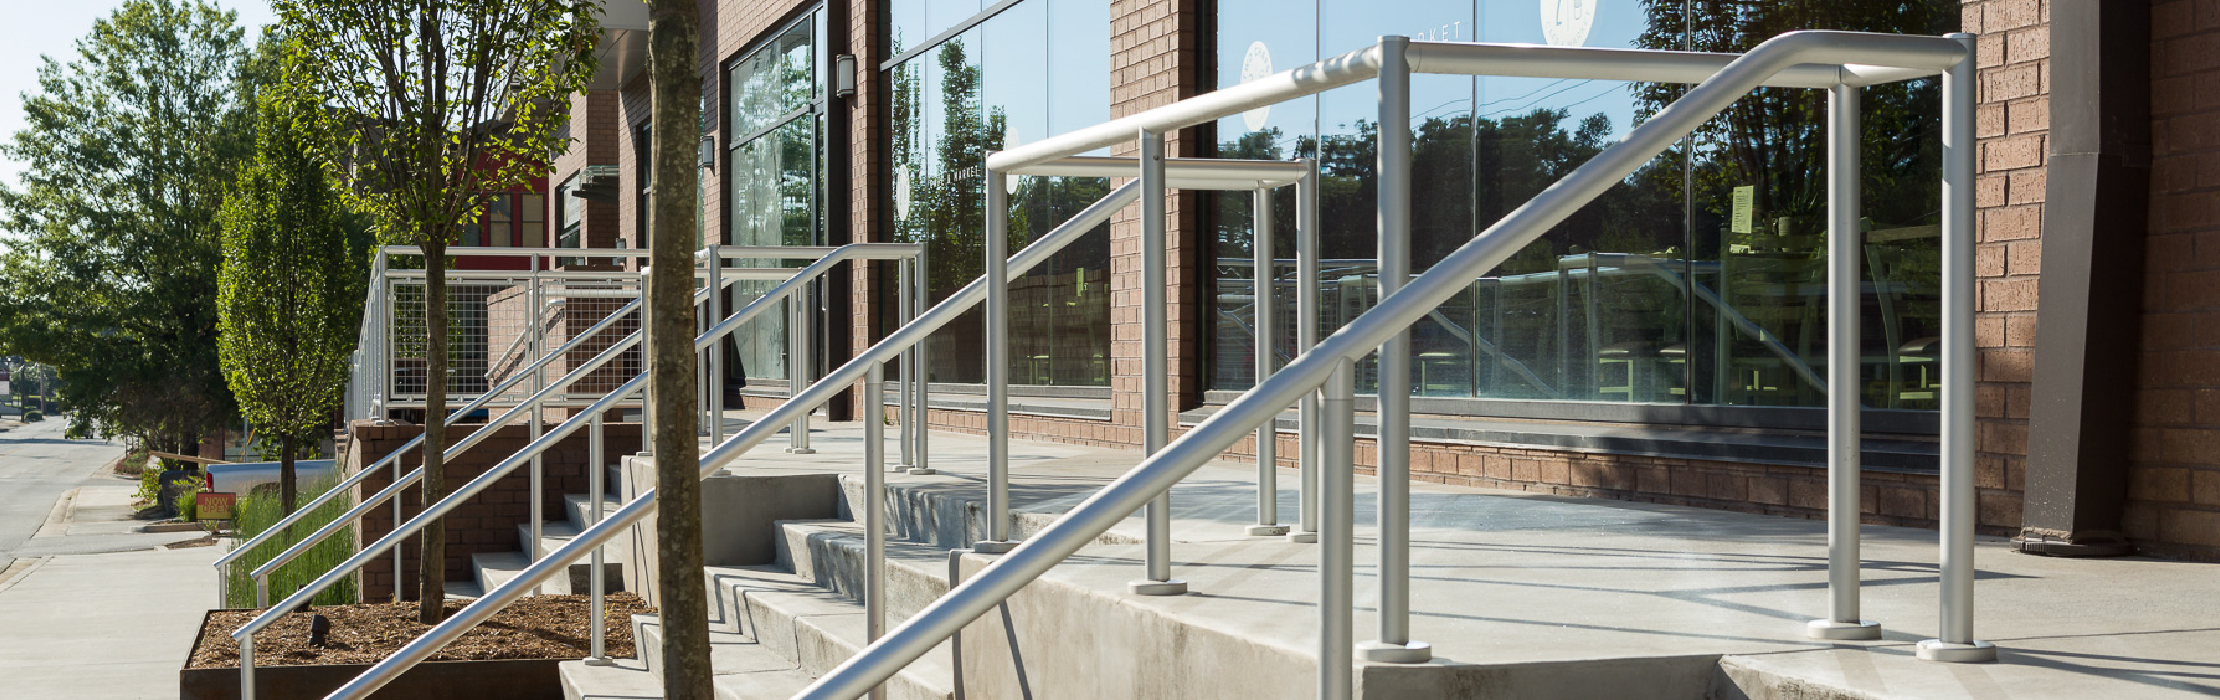 Commercial Railing Systems